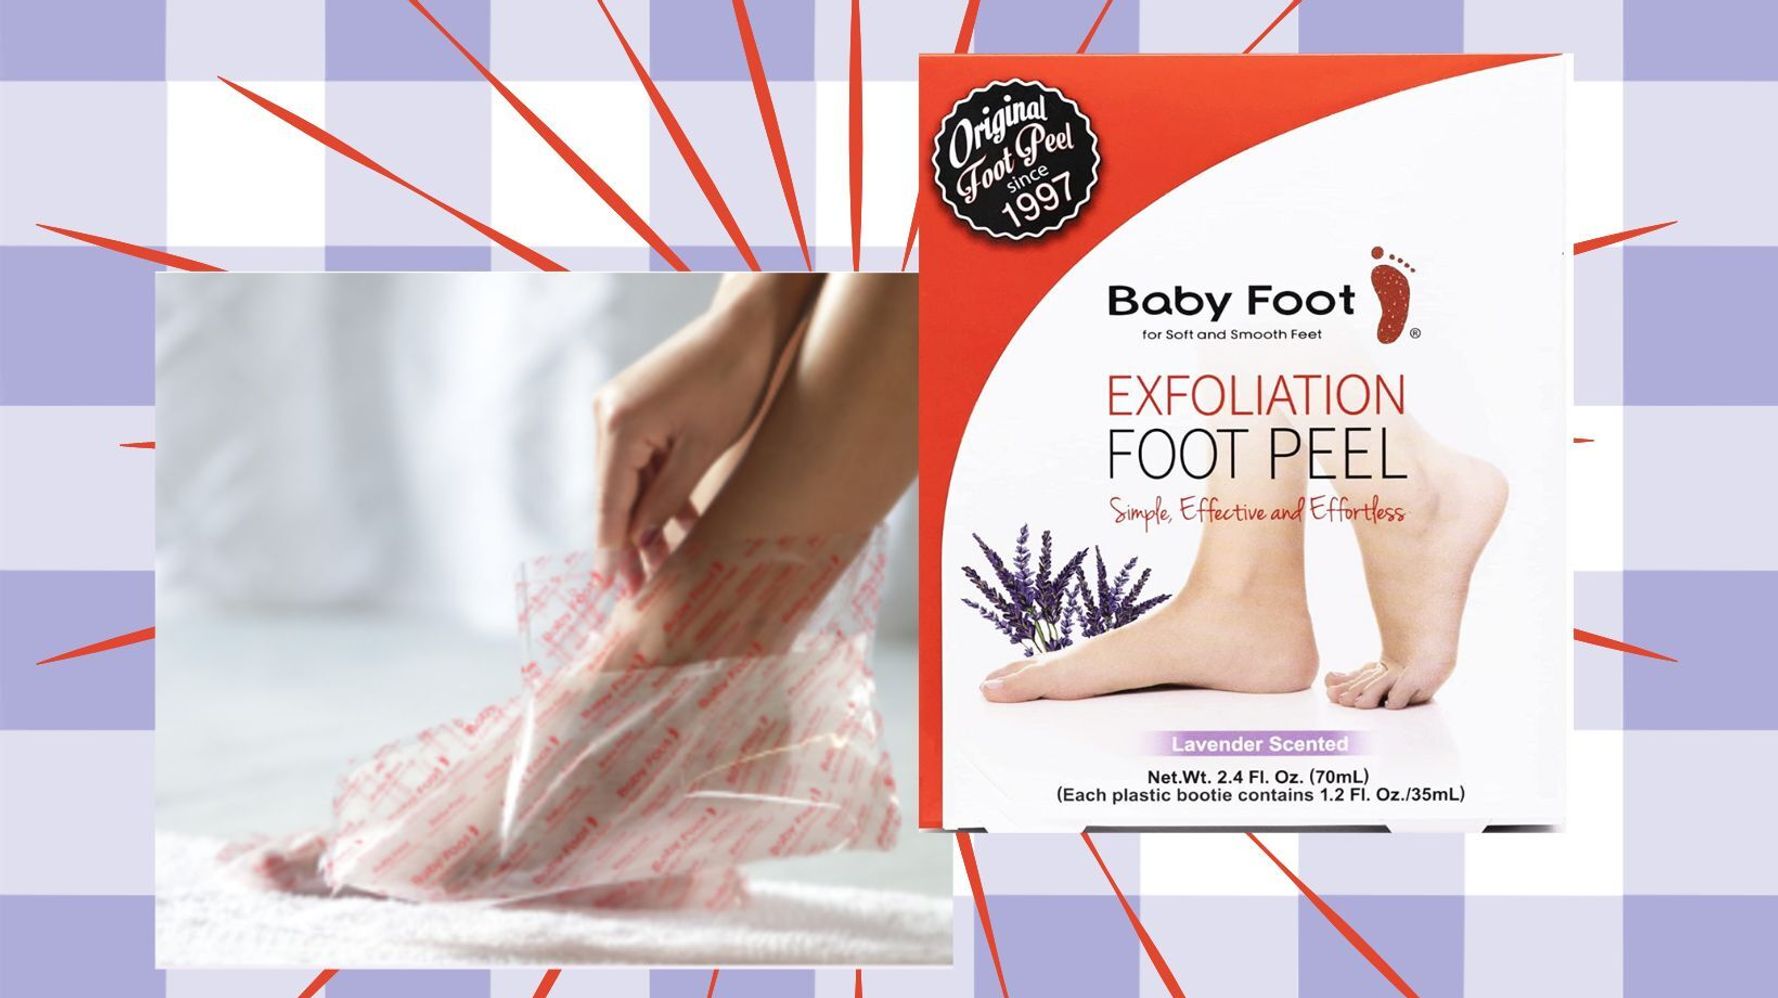 Baby Foot Peel Review: Results, Photos, and Before and After - The